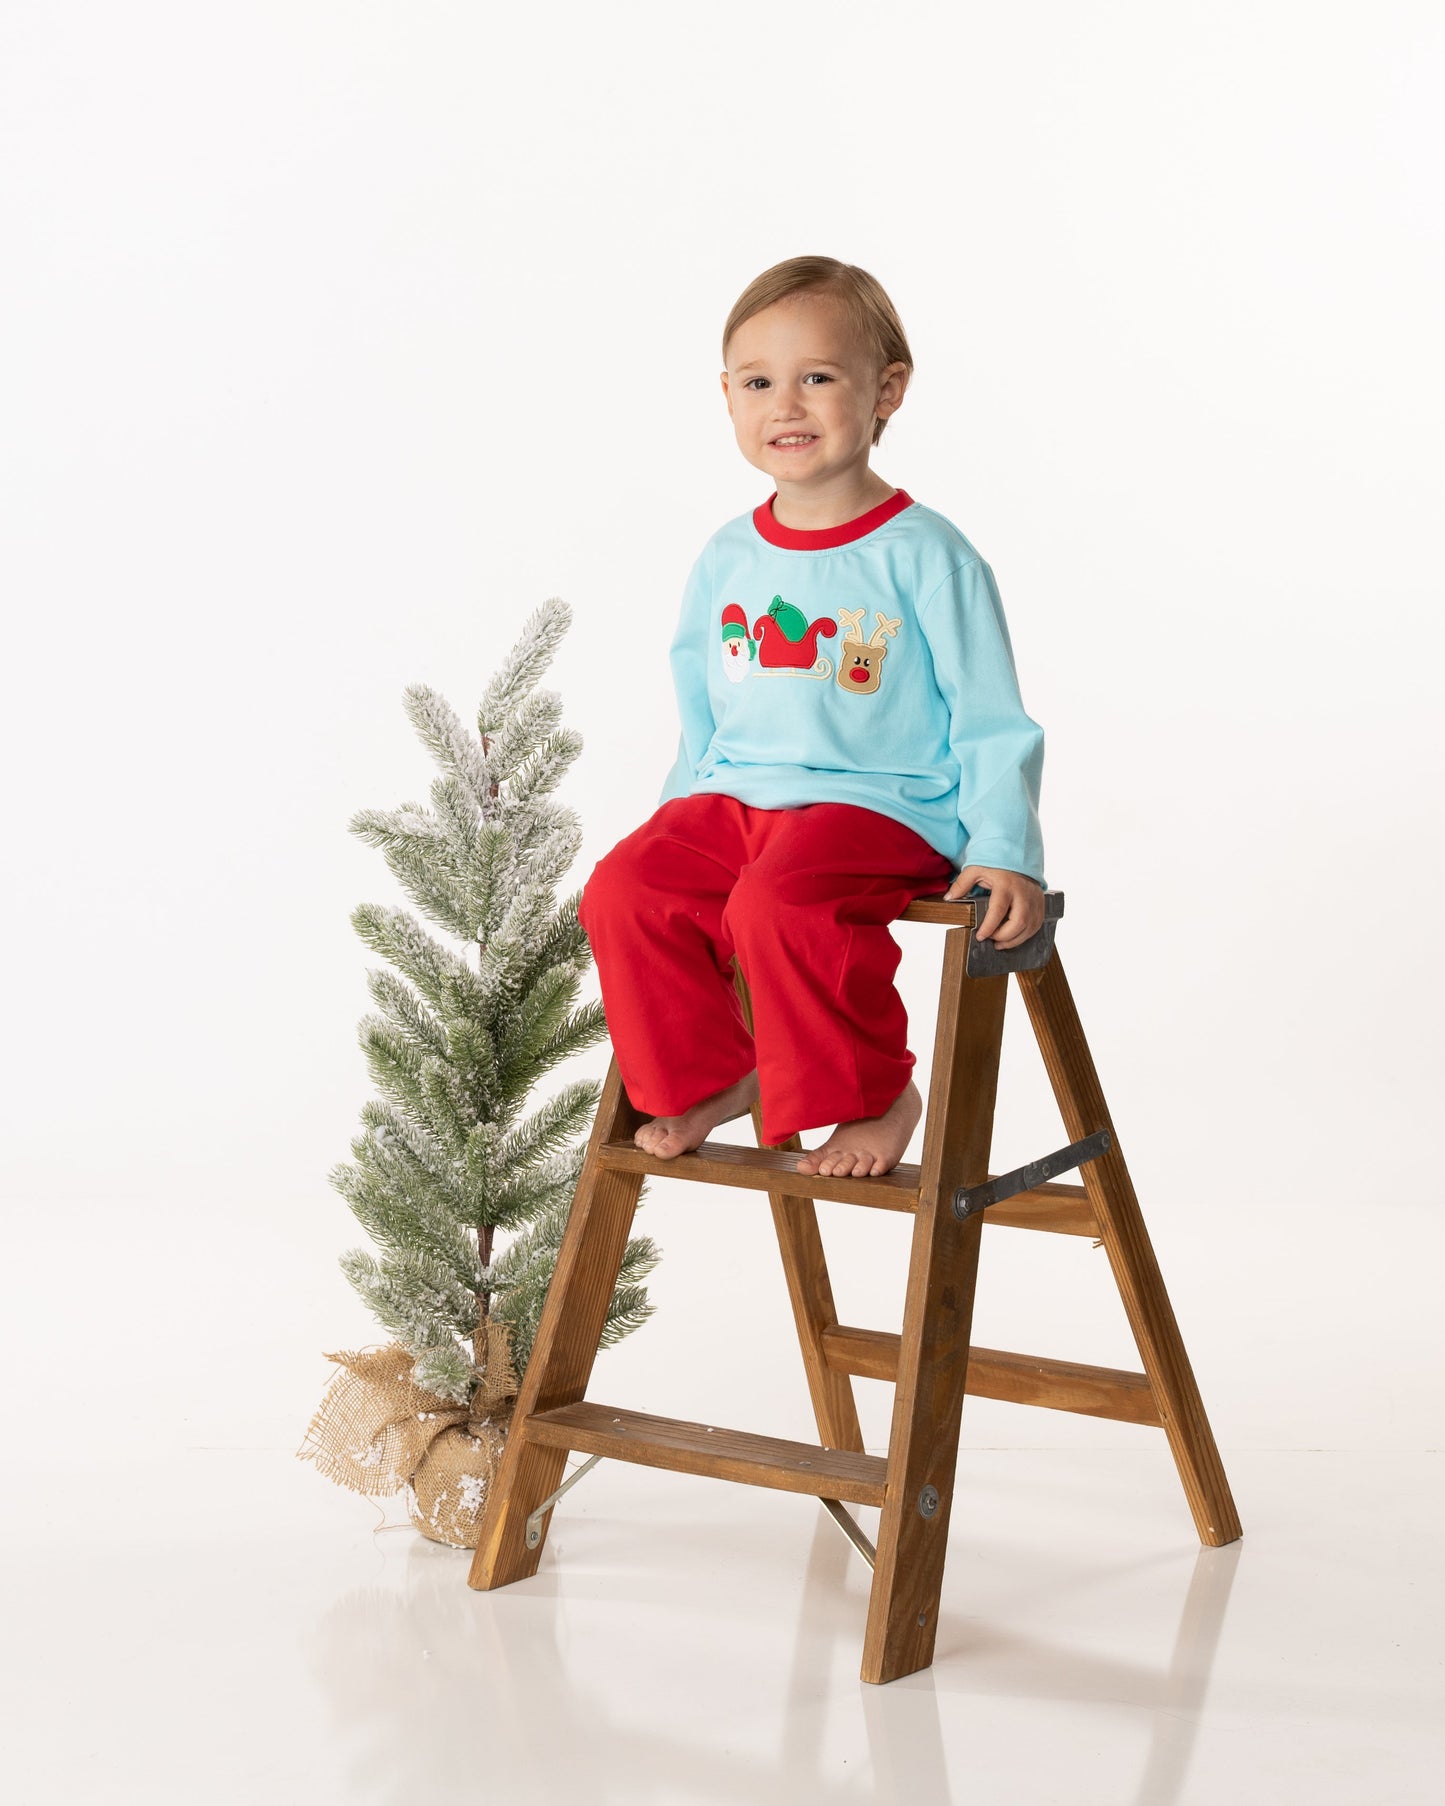 Harrison Holiday Trio Long Sleeve Shirt Jellybean by Smock Candy